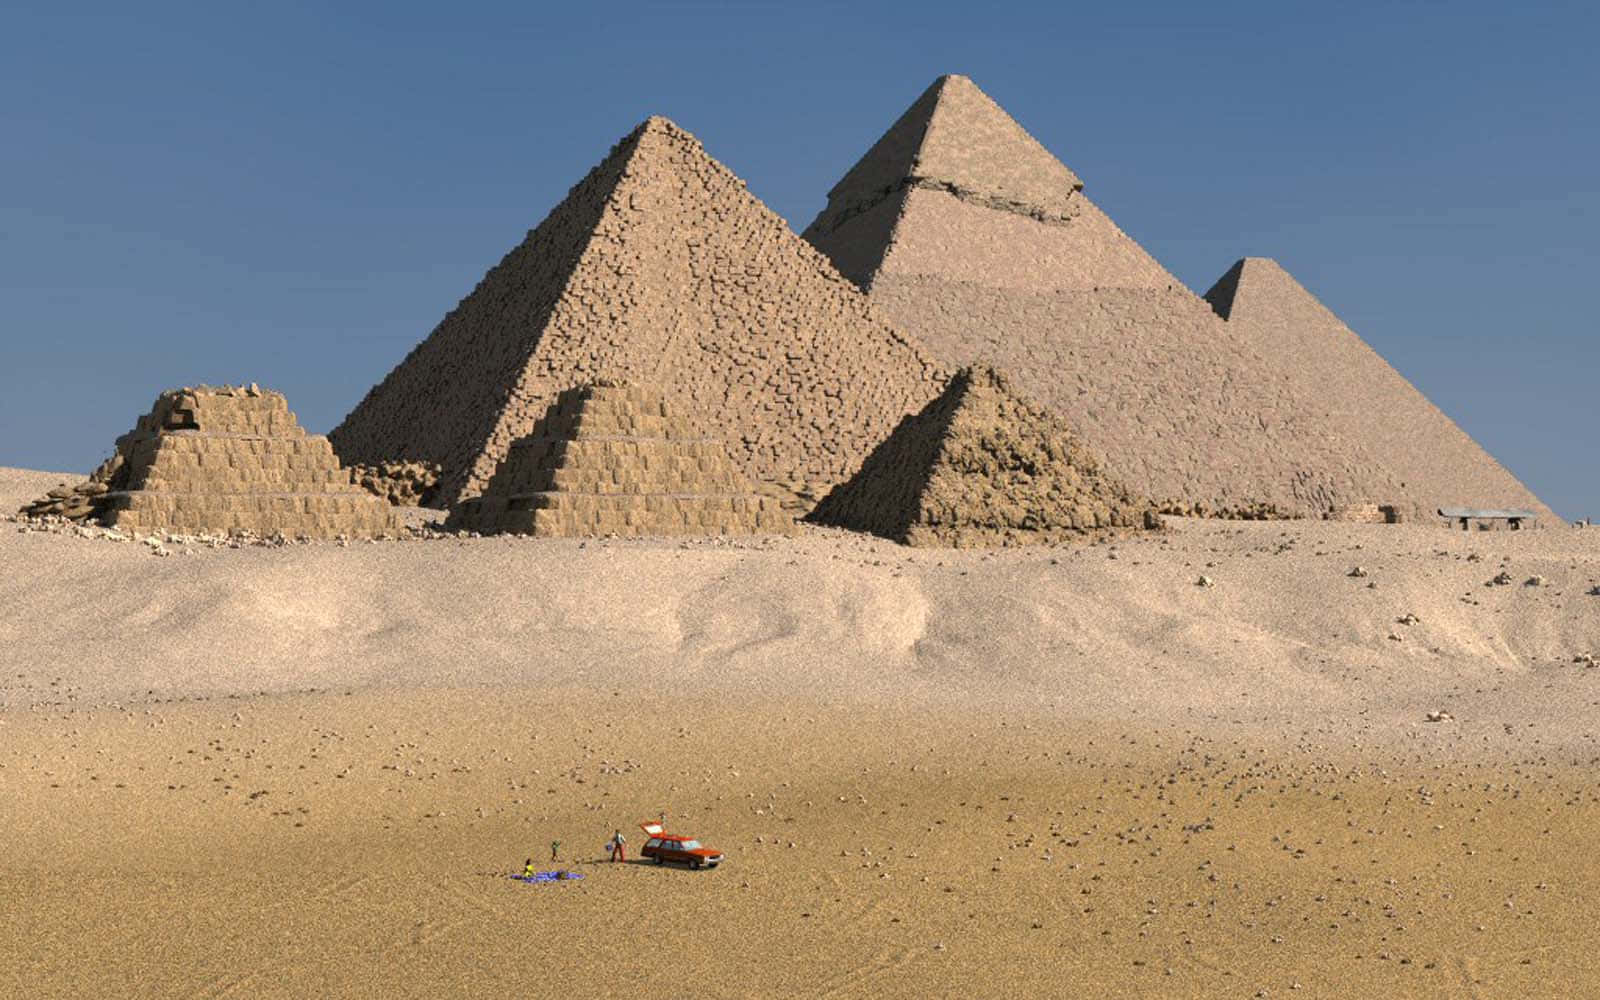 A 3d Model Of The Pyramids Of Giza